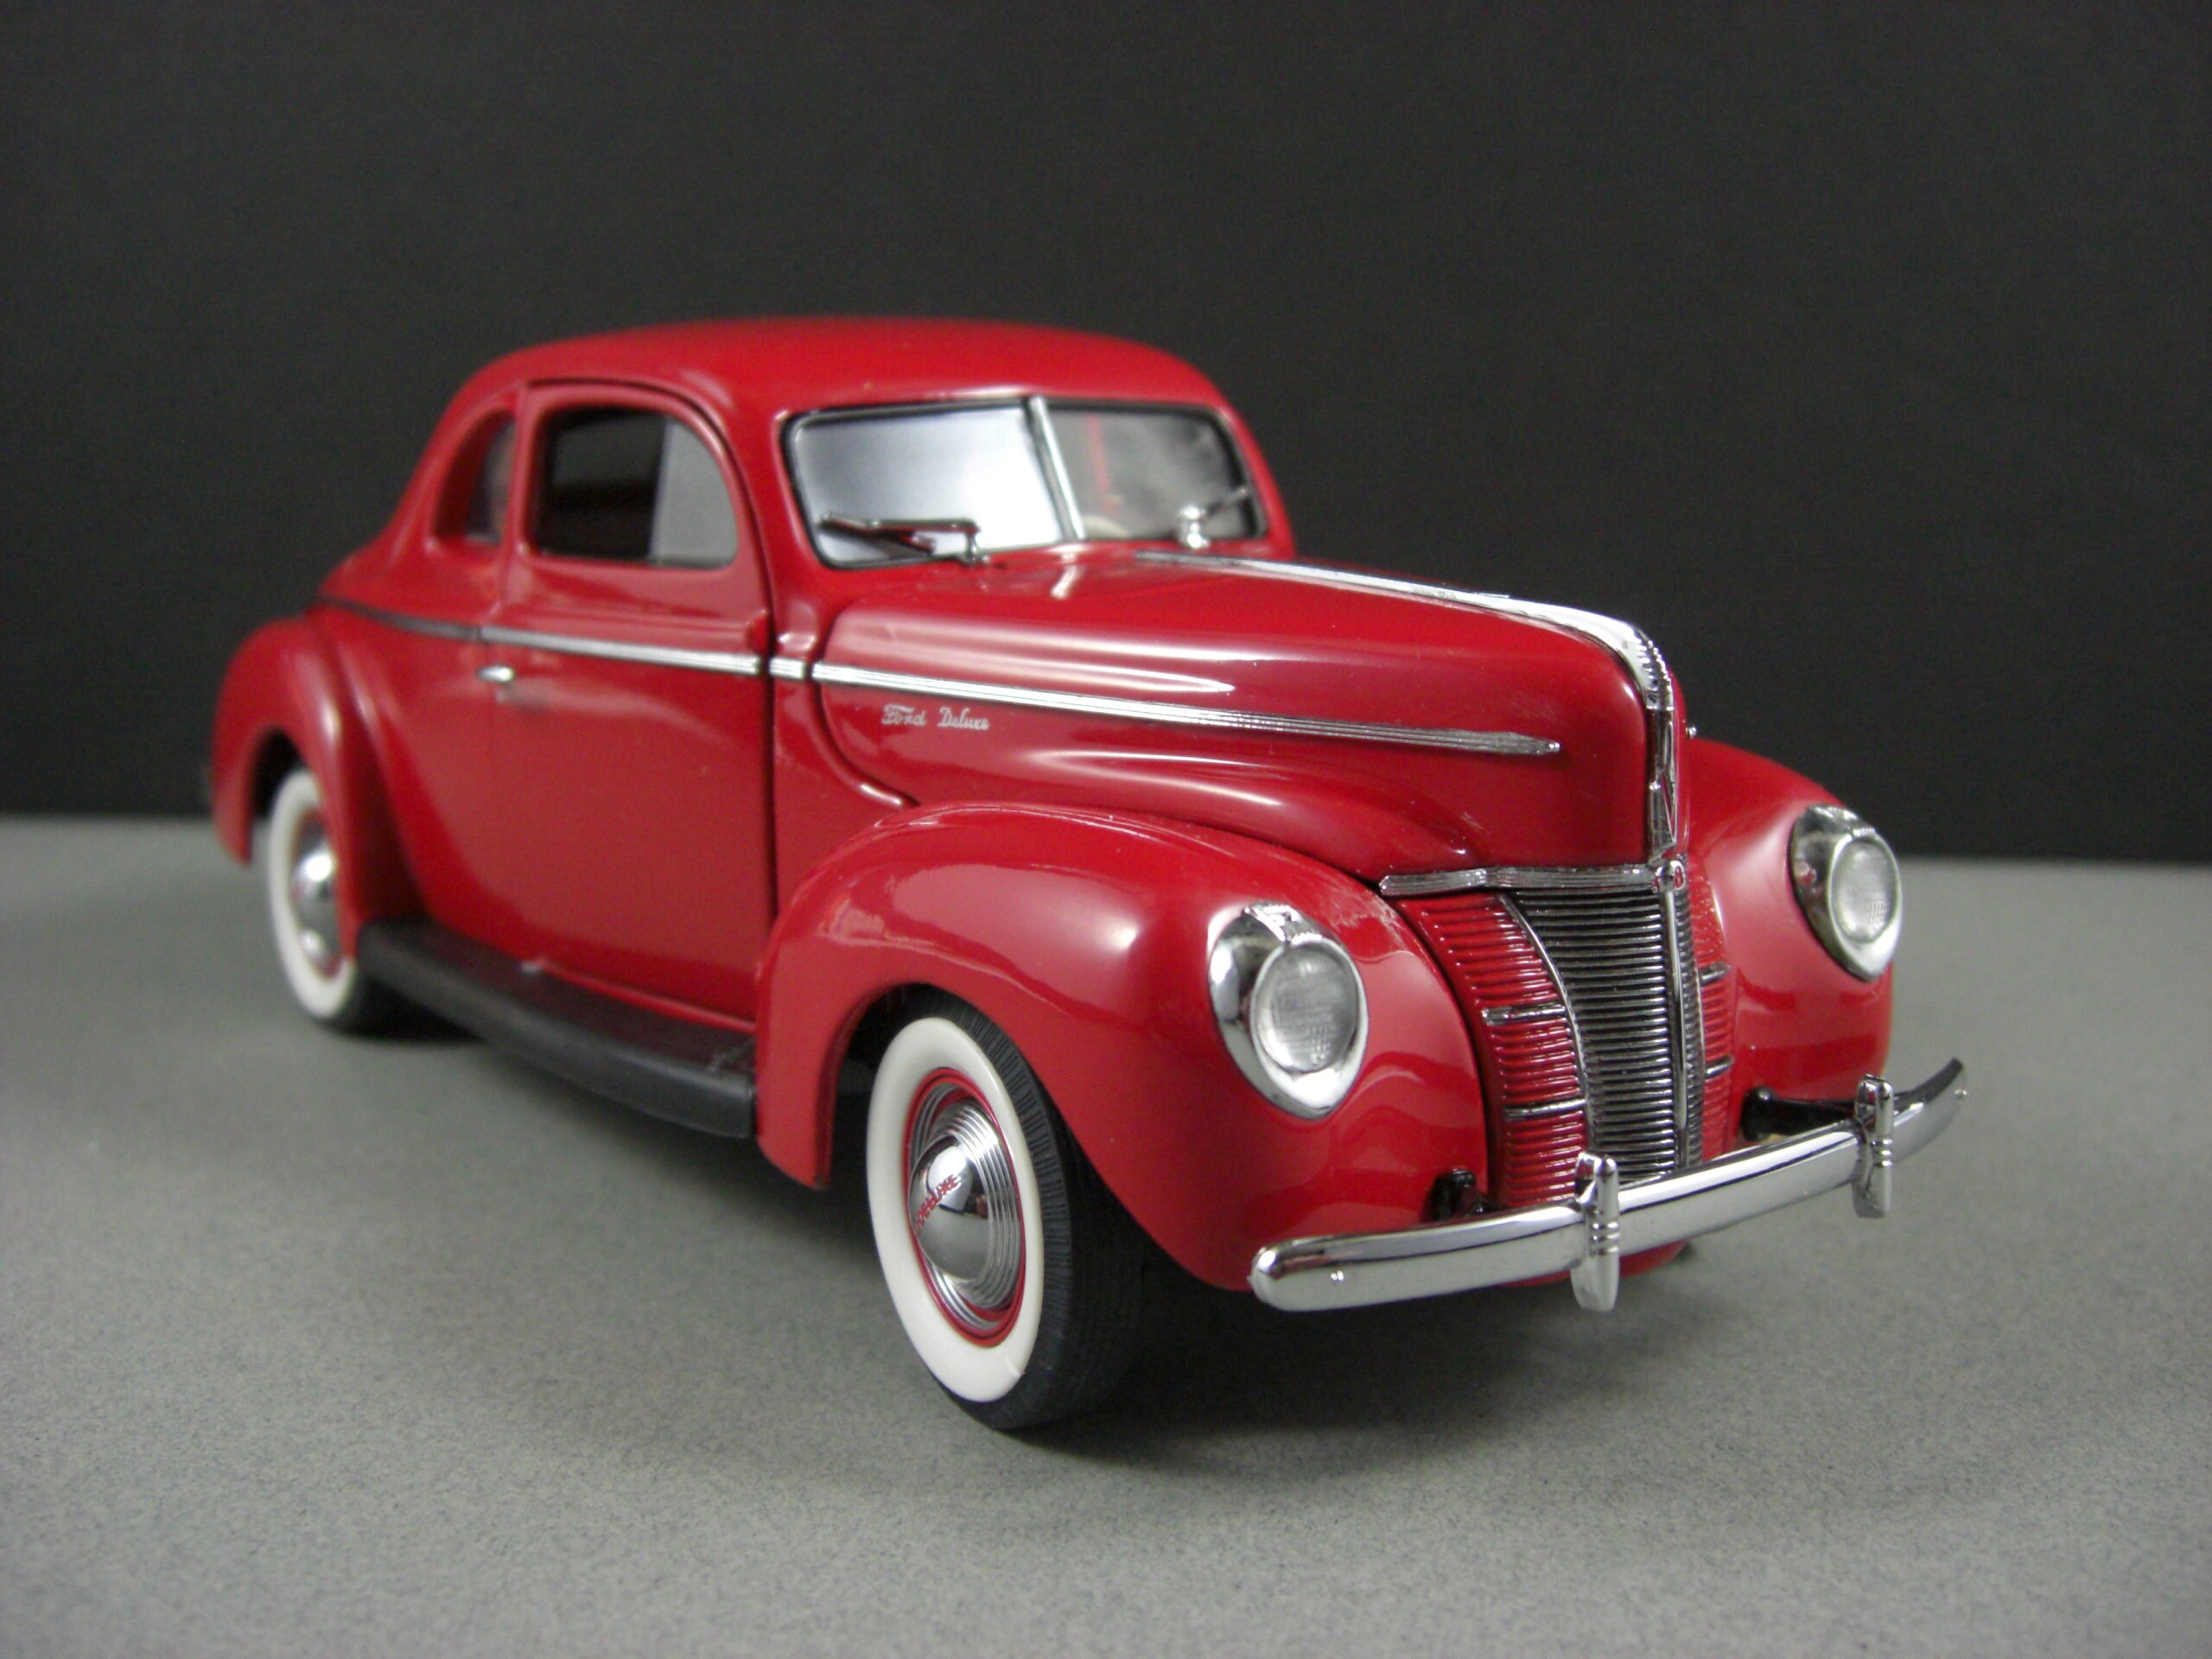 1940 Ford Deluxe Coupe 1:24th Scale Die Cast Metal Model Car by Danbury  Mint, Derelict, Barn Find, Upcycle